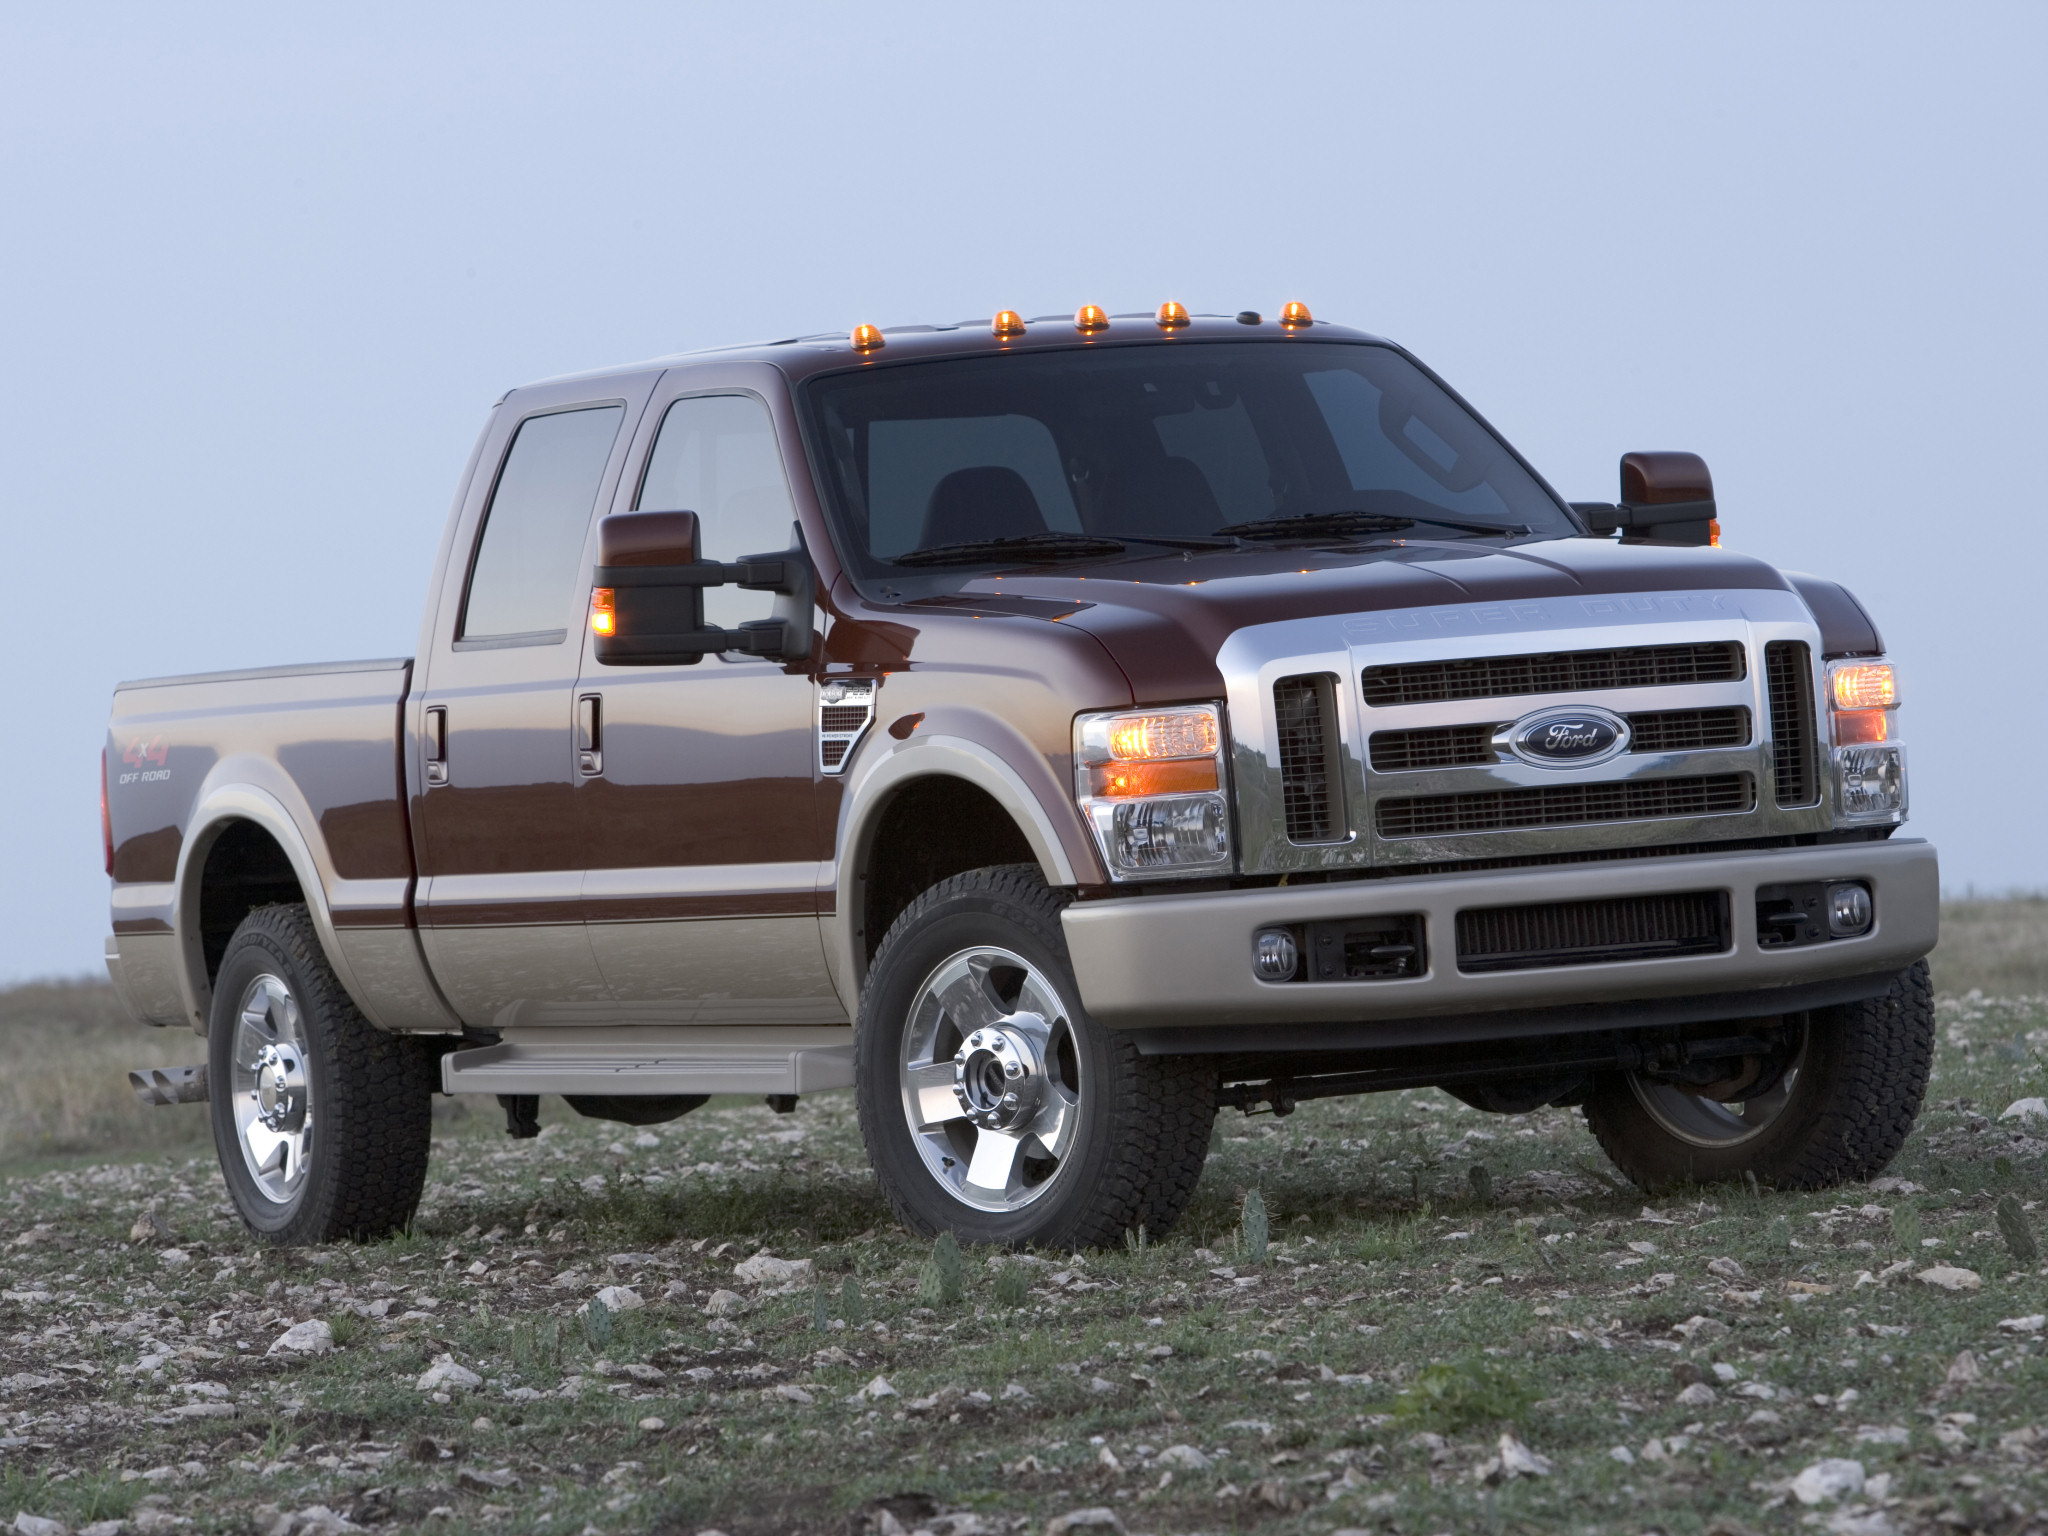 Ford F Superduty Truck Wallpaper Background